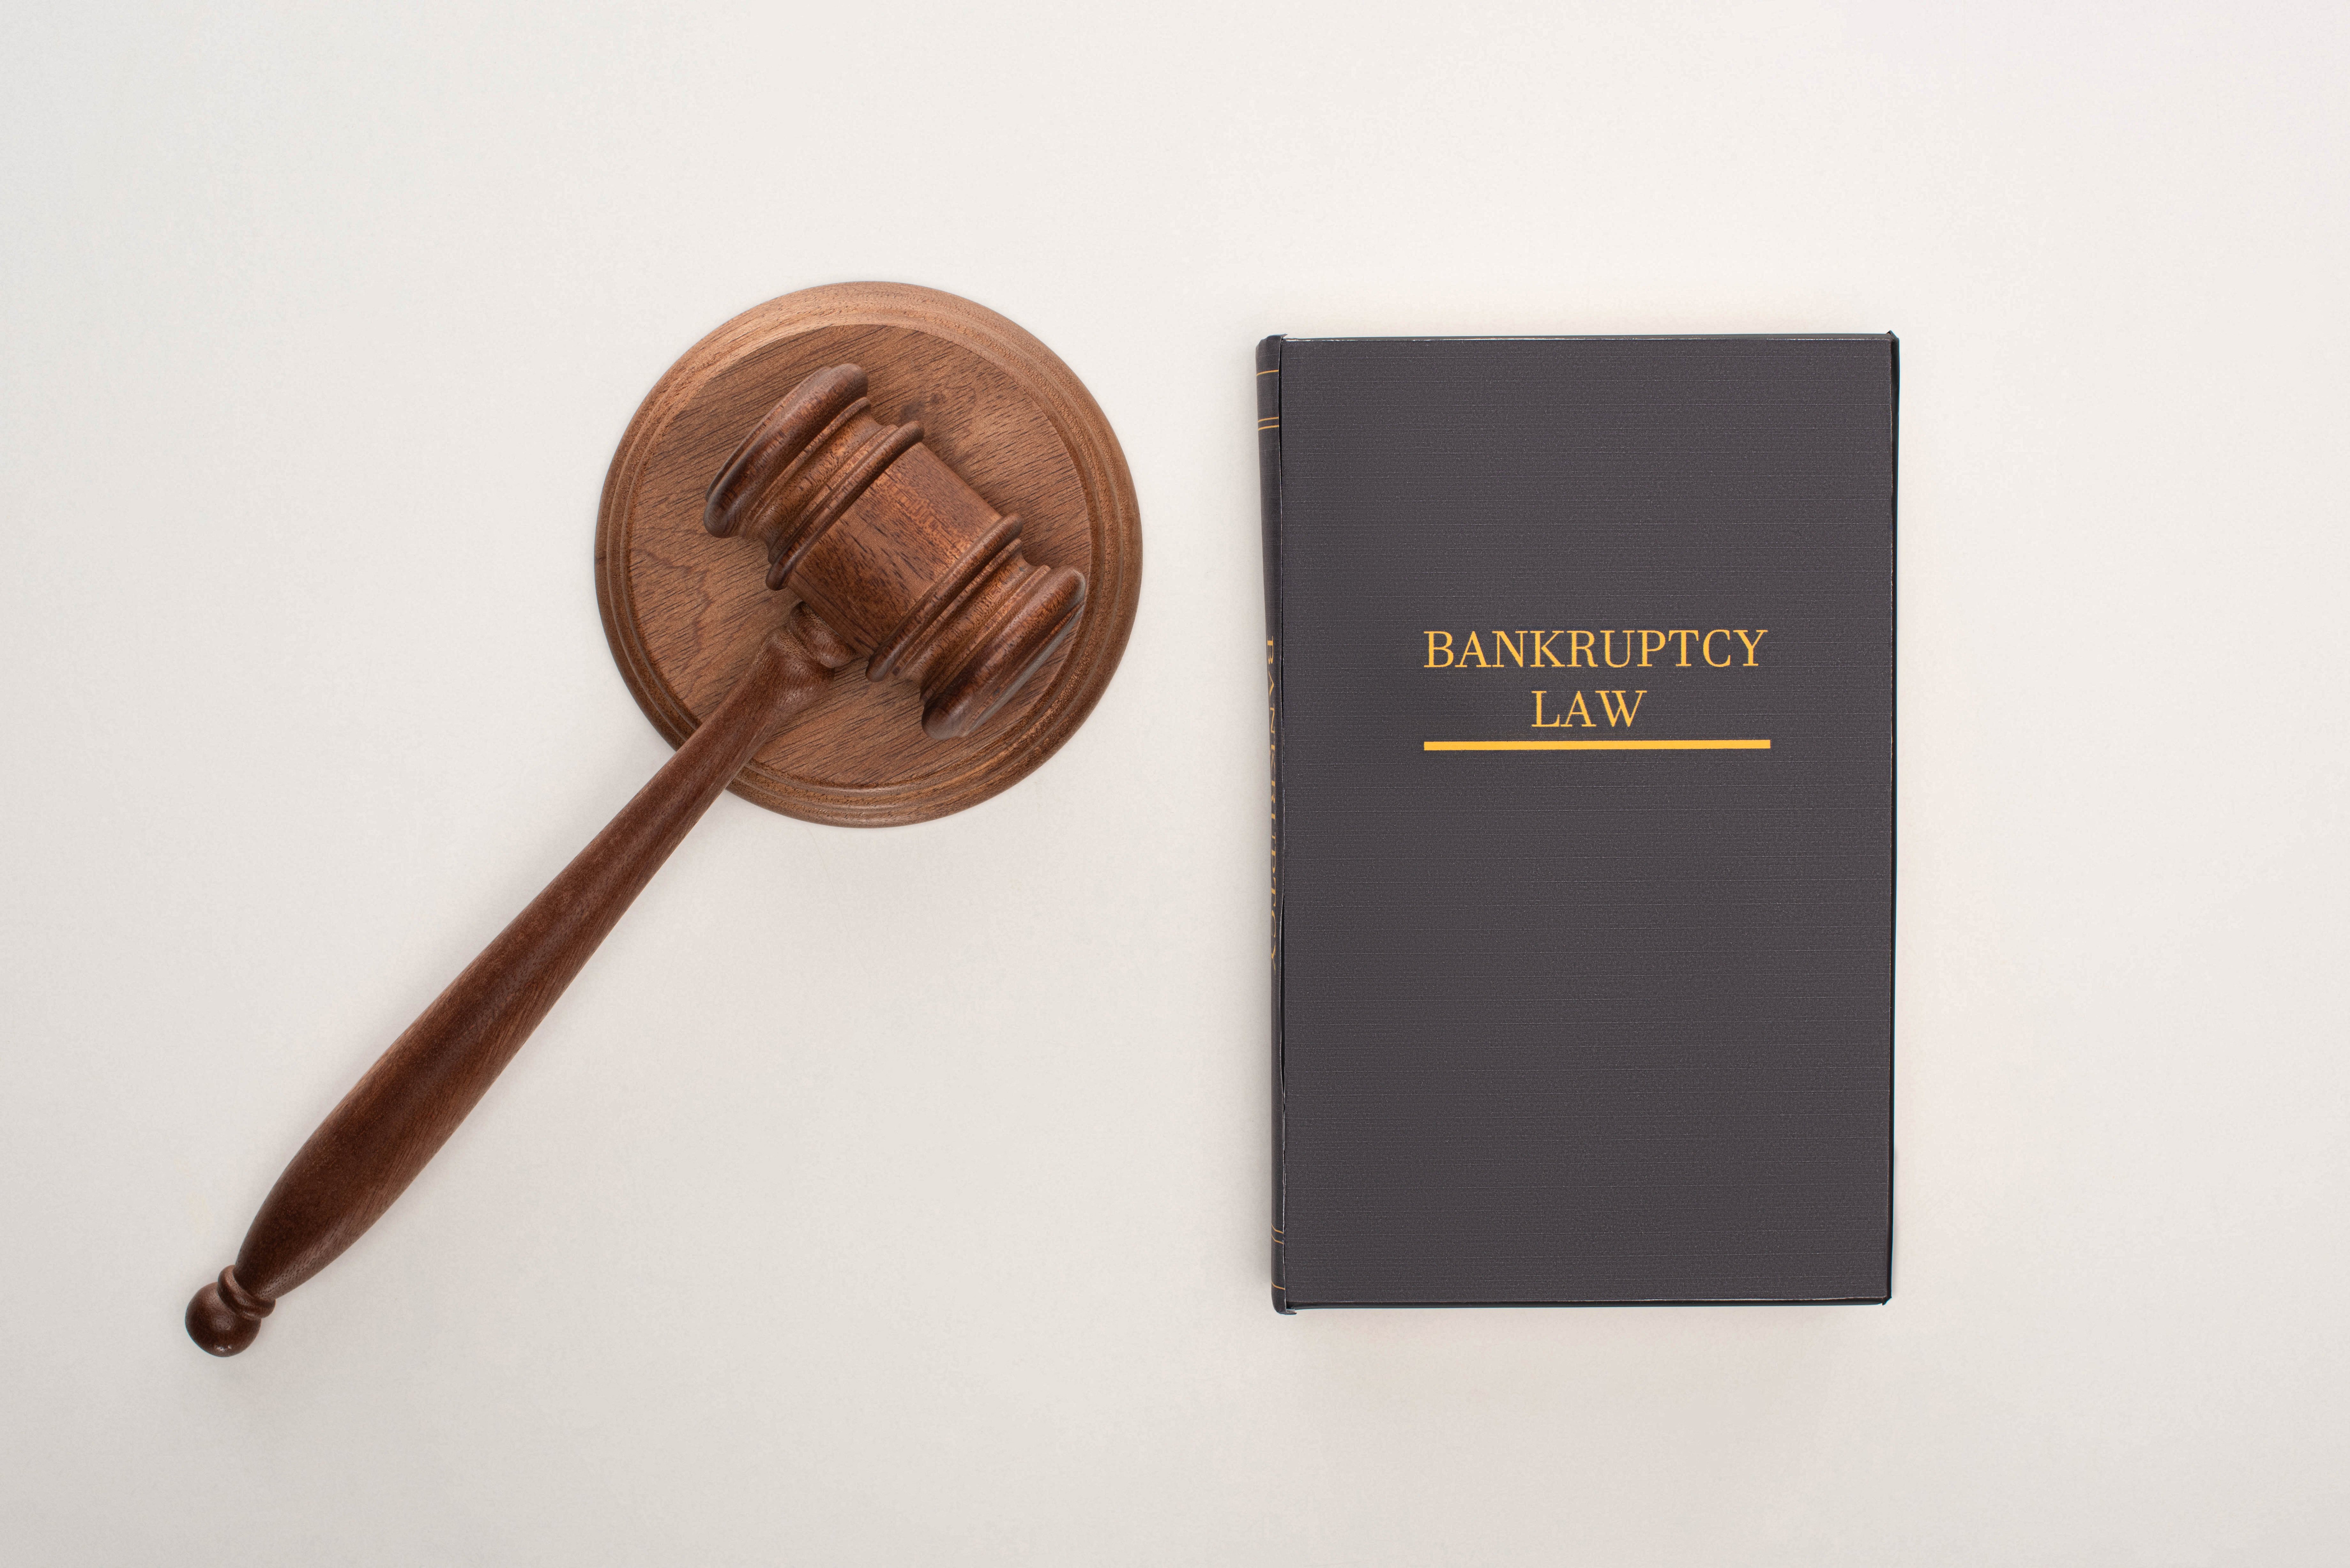 top-view-of-bankruptcy-law-book-and-gavel-on-white-2022-12-16-15-52-21-utc